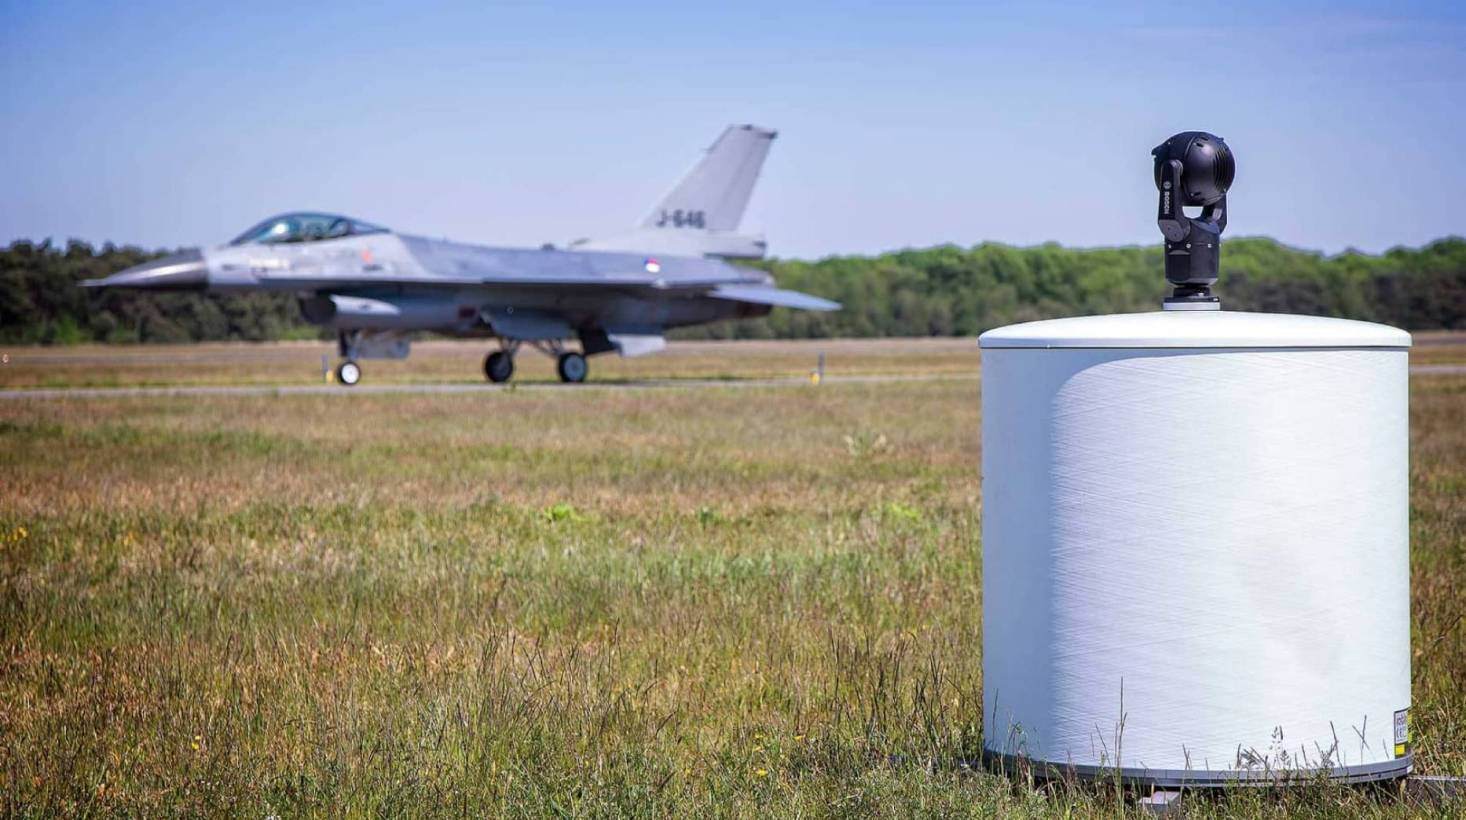 ELVIRA drone detection radar mounted on a white cylinder beside a runway, with a gray fighter jet parked in the background